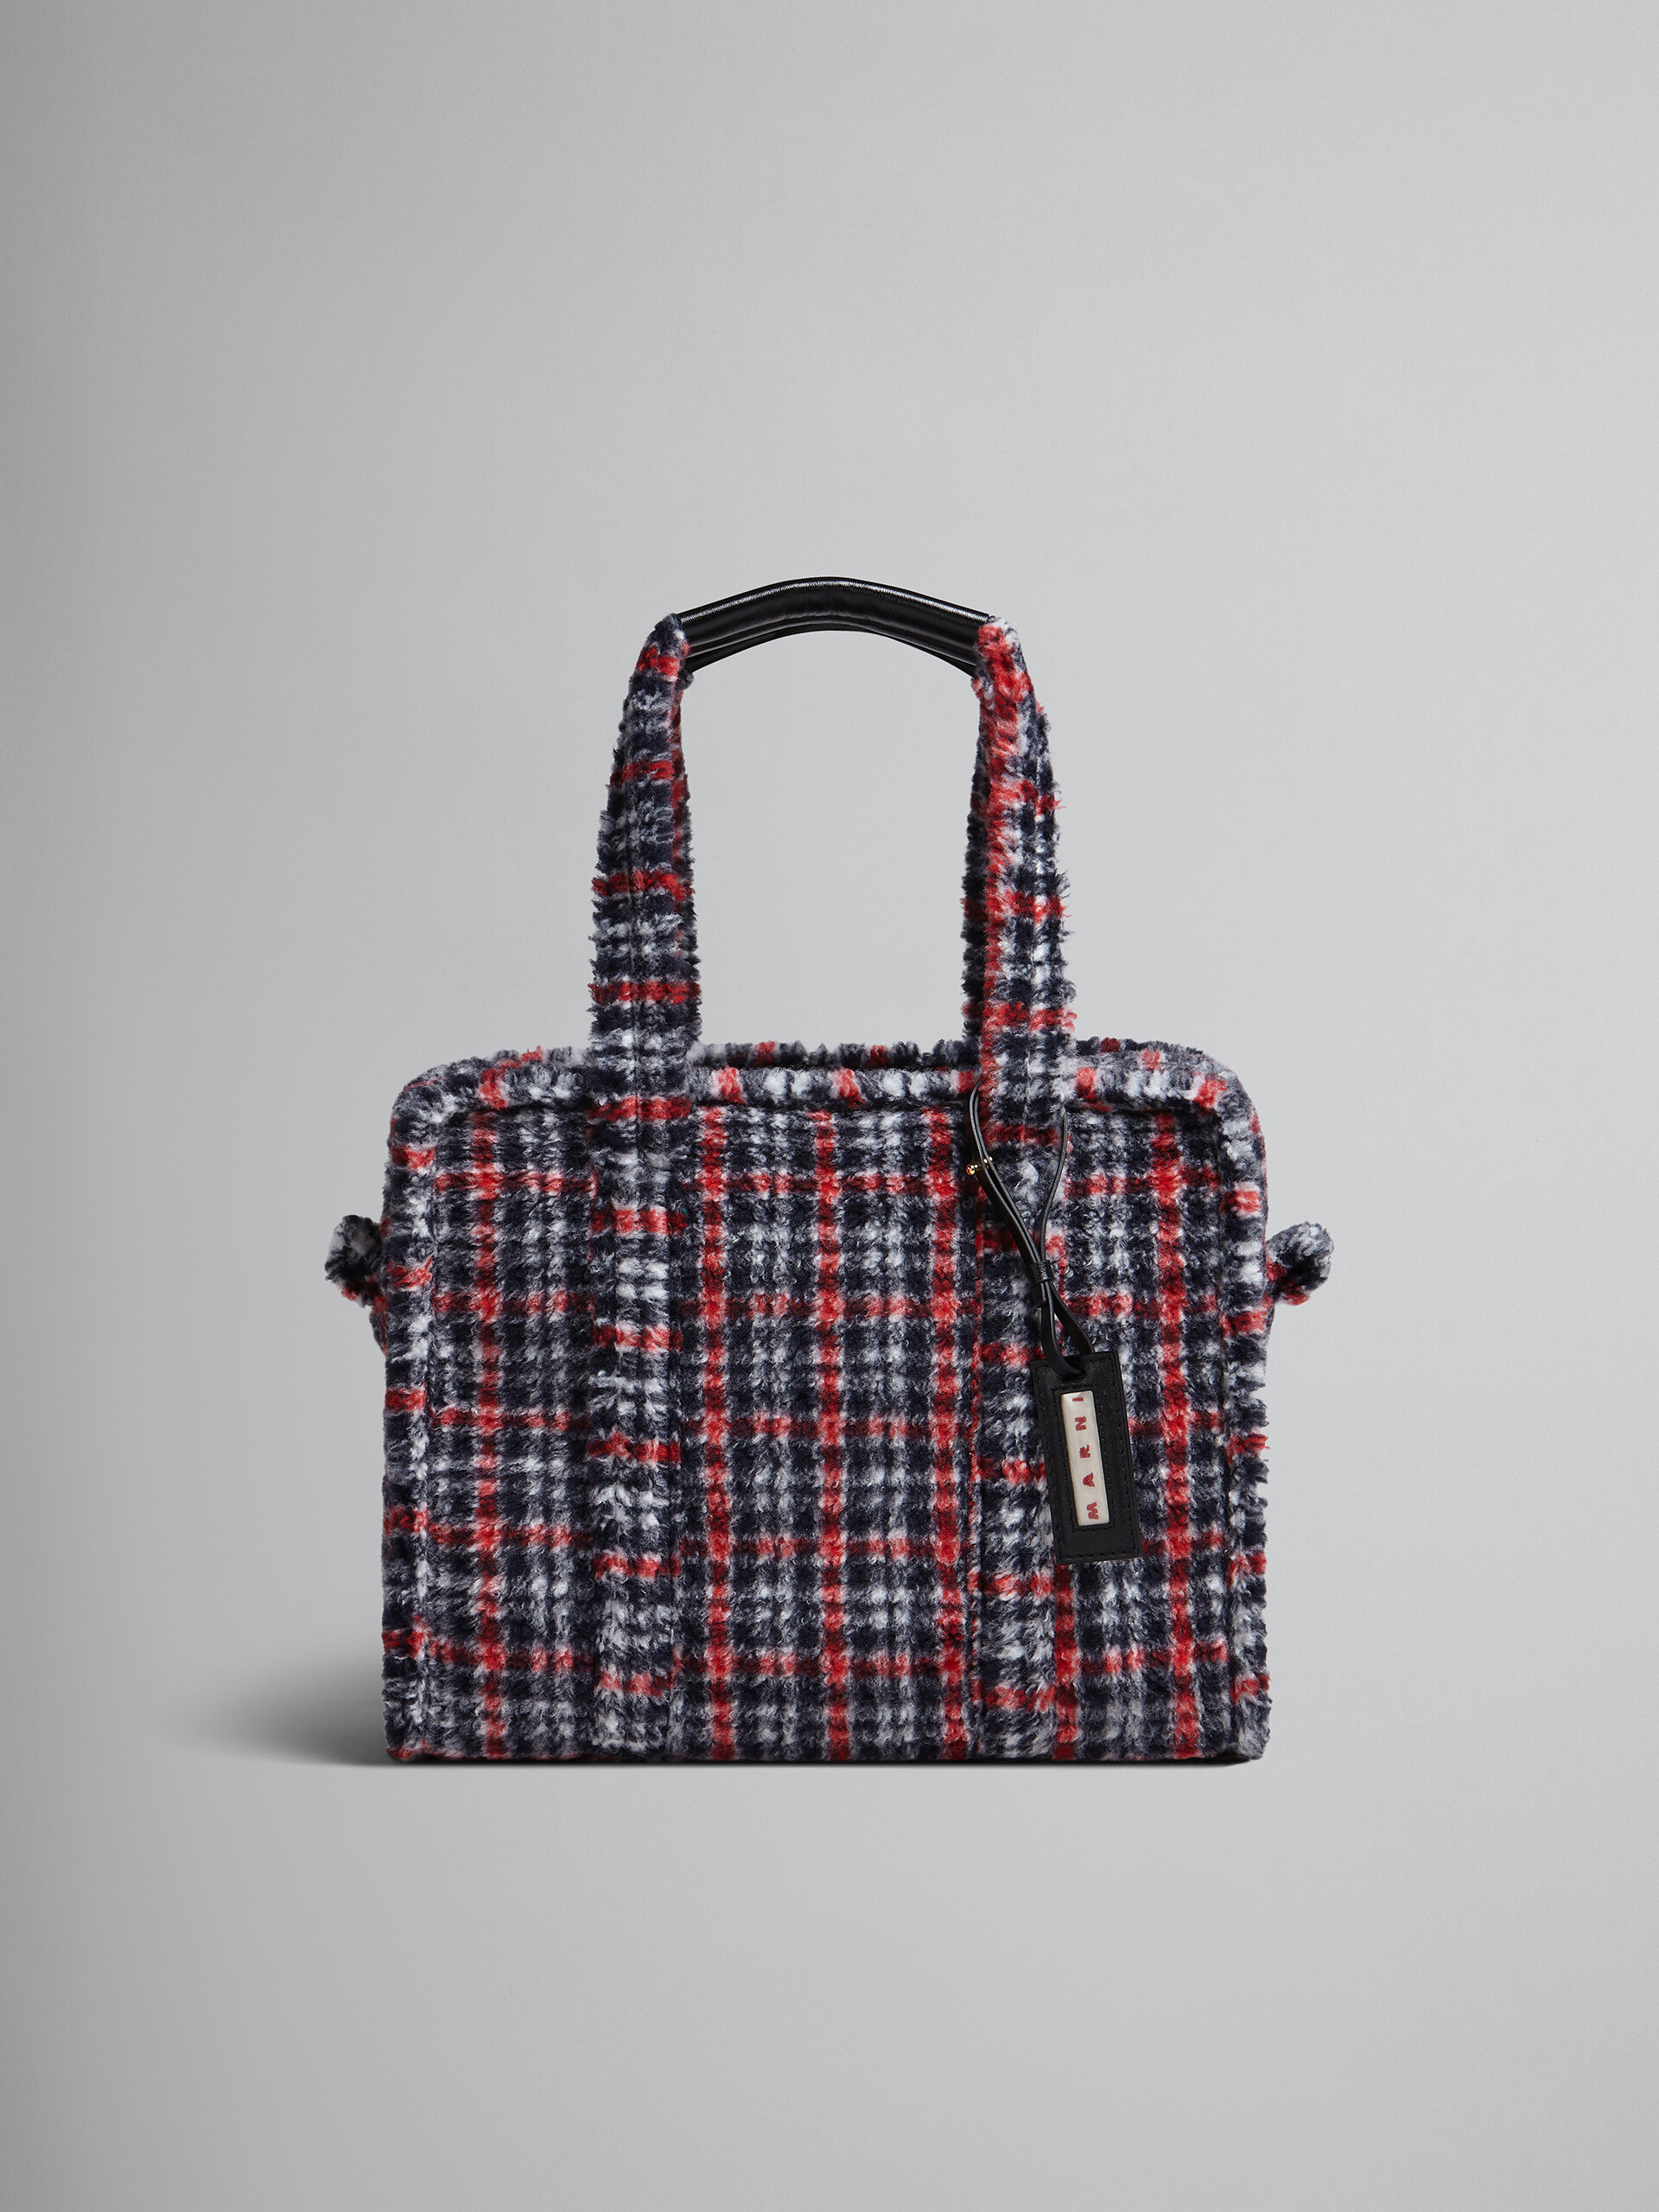 Small travel bag in check fabric - Shopping Bags - Image 1